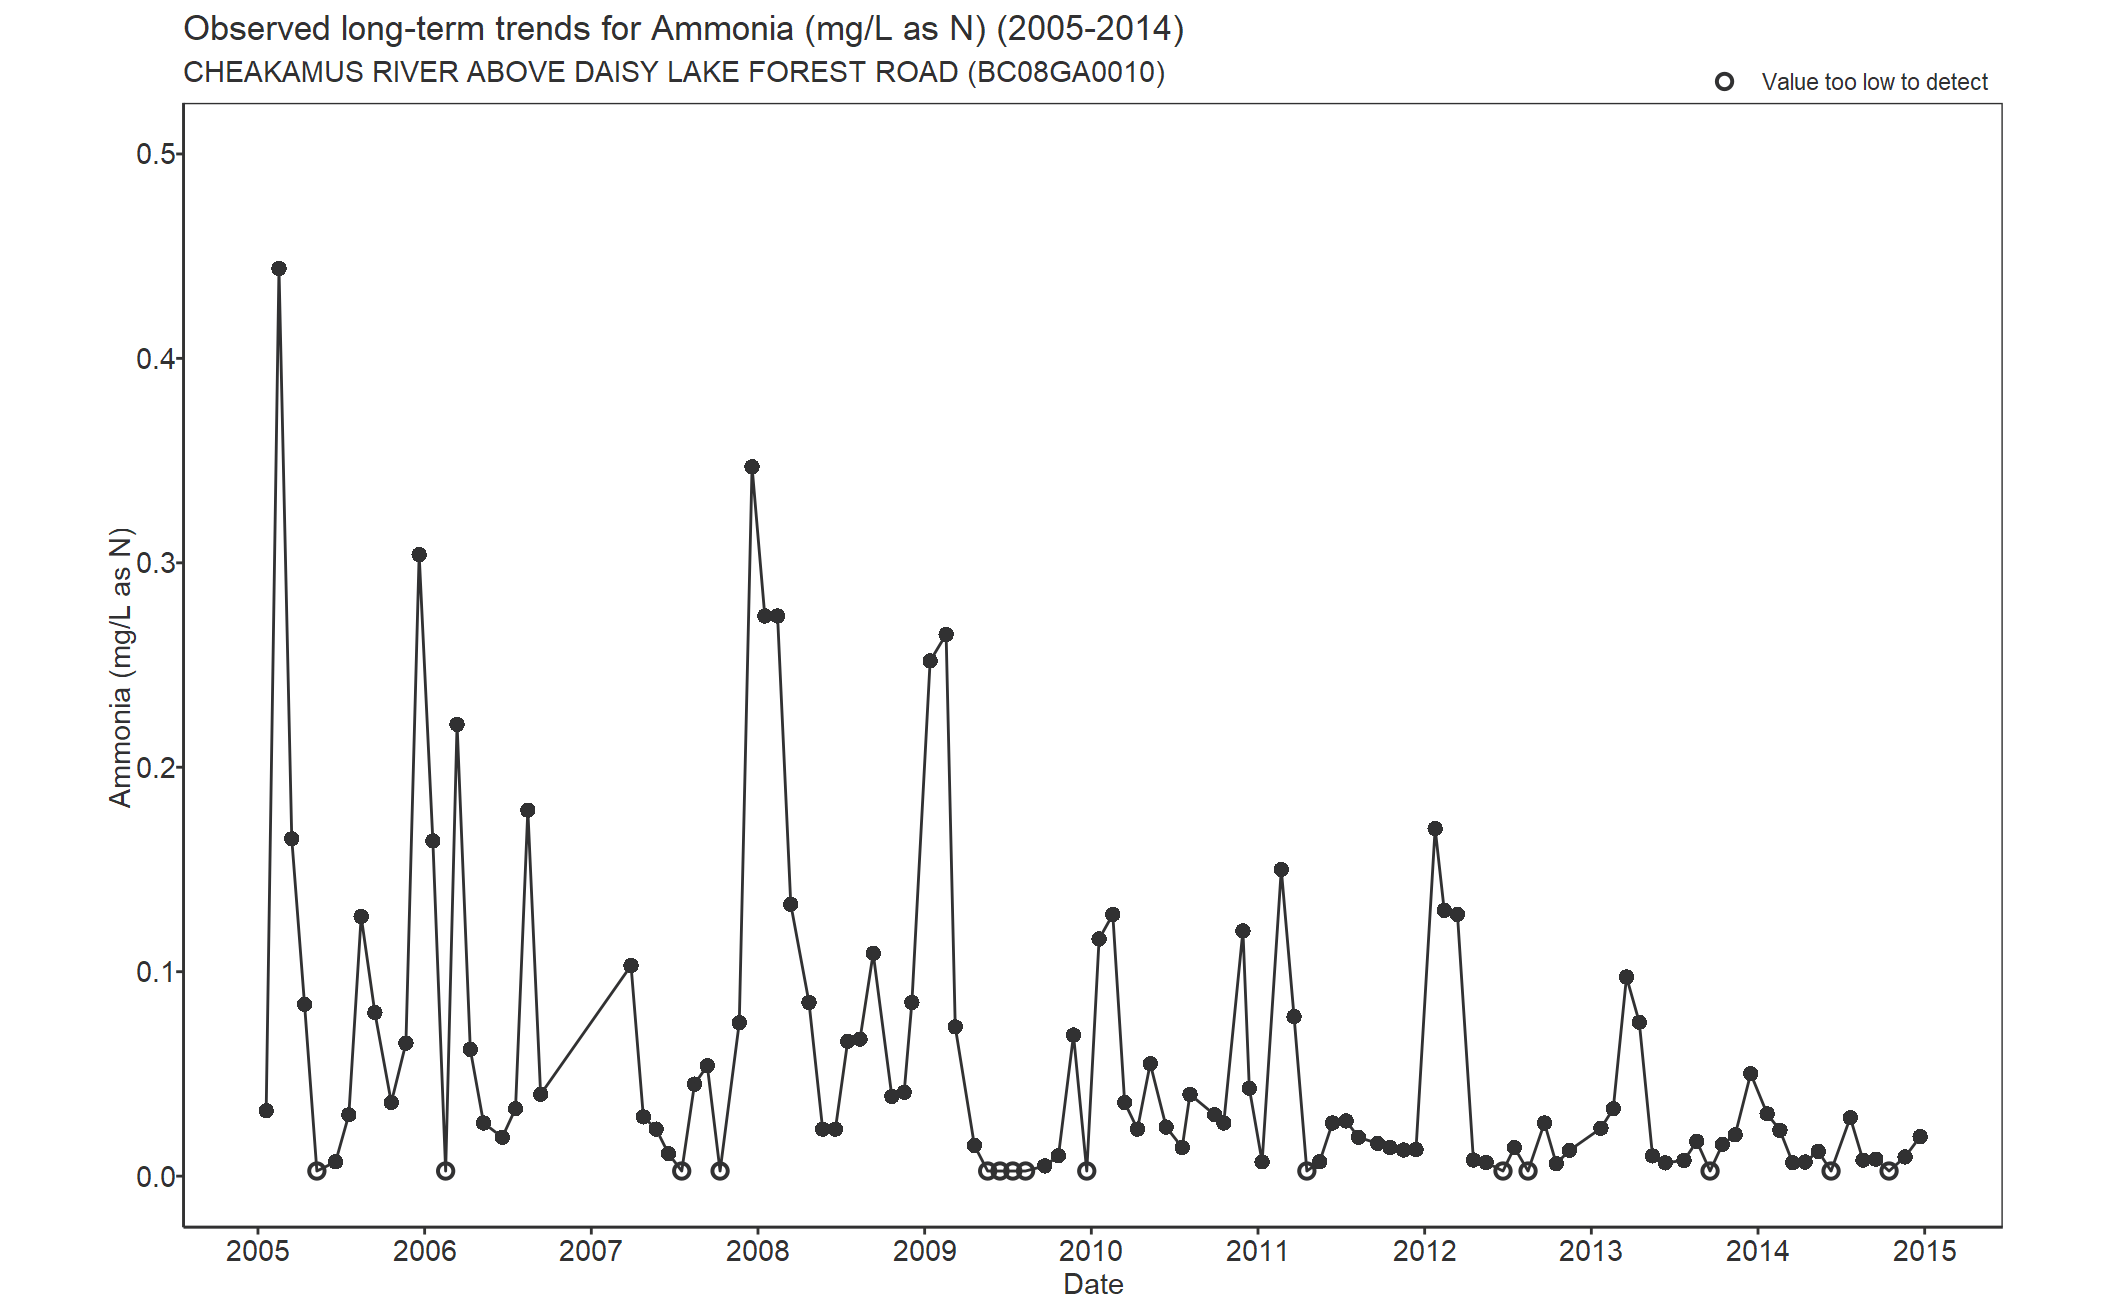 Observed long-term trends for Ammonia (2005-2014)